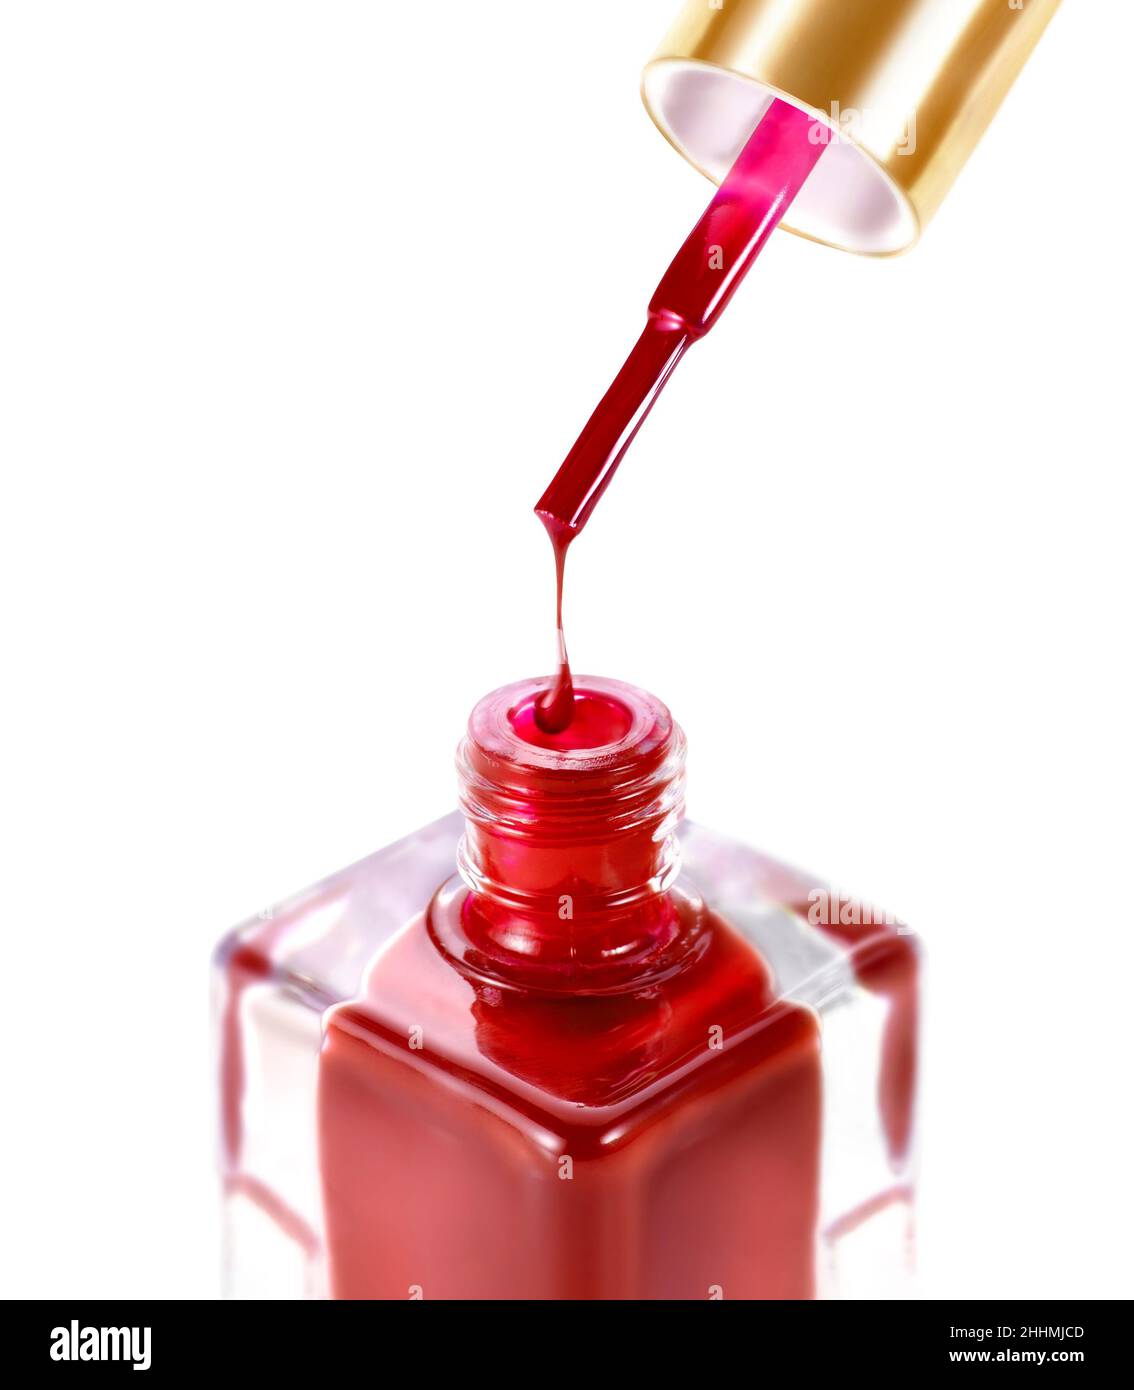 Red color nail polish bottle and brush dripping in. Against white background Stock Photo